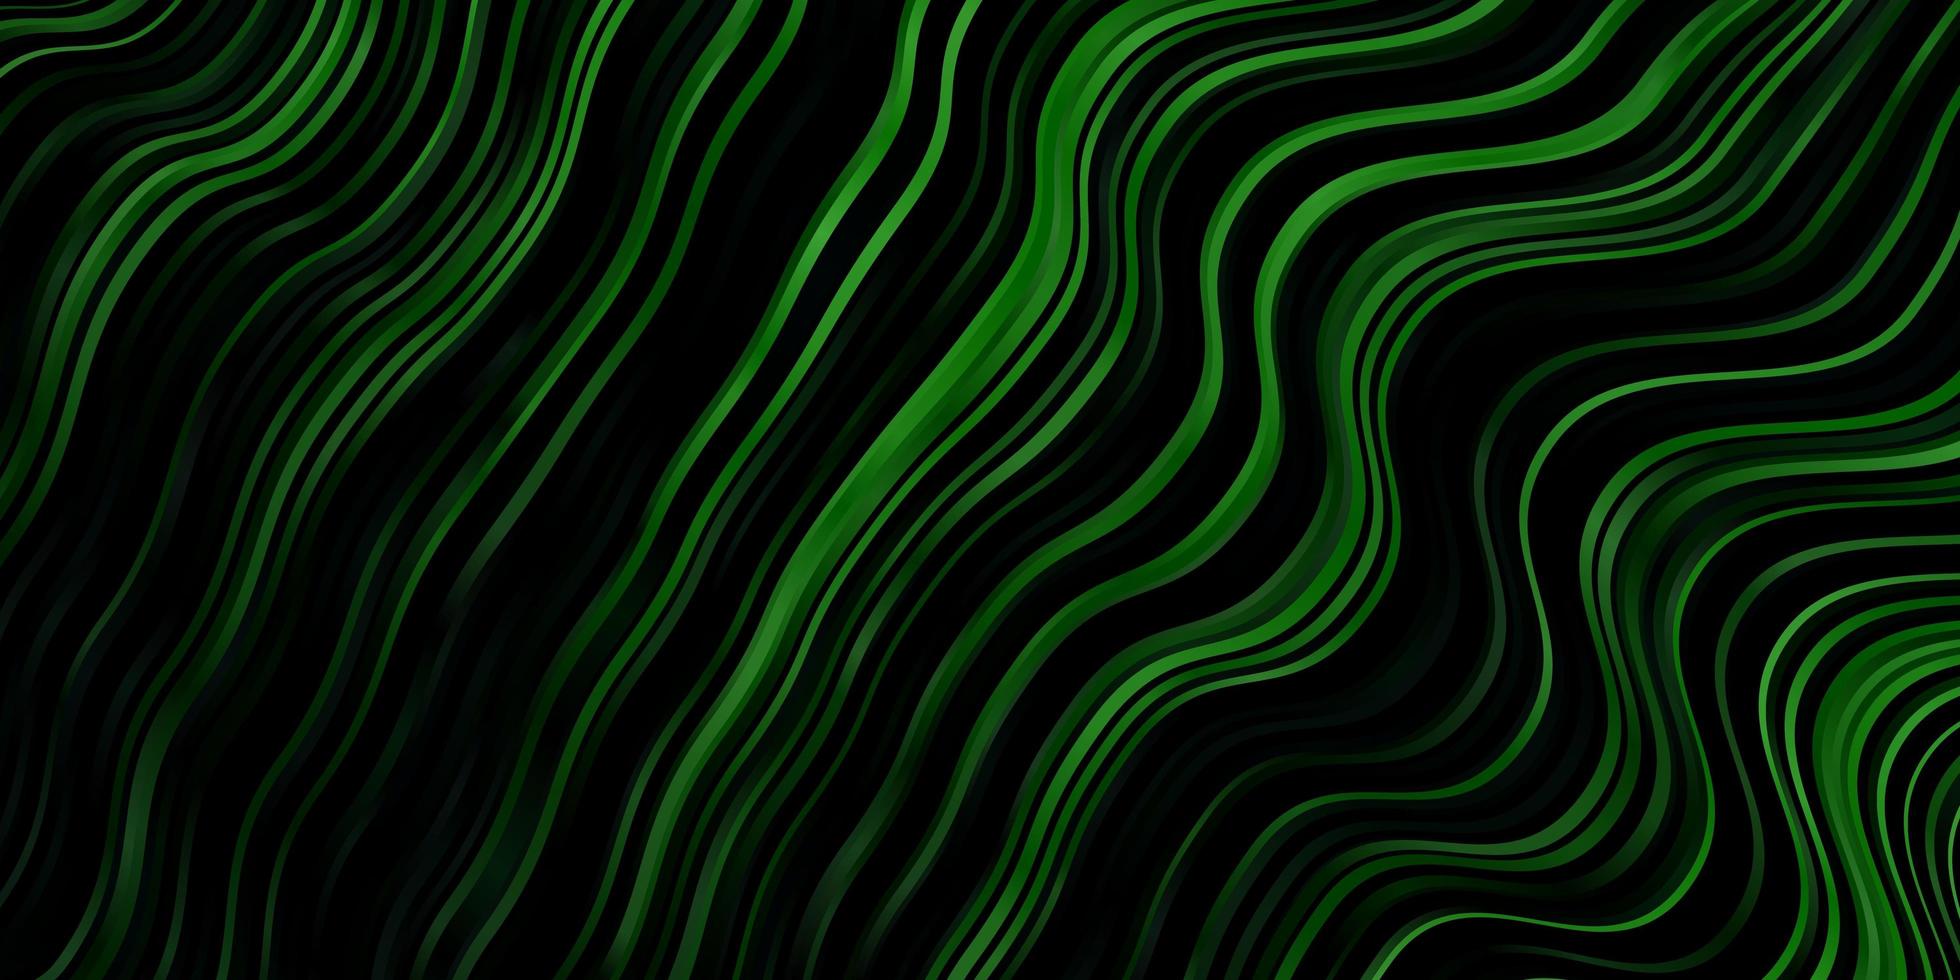 Dark Green vector template with curves.